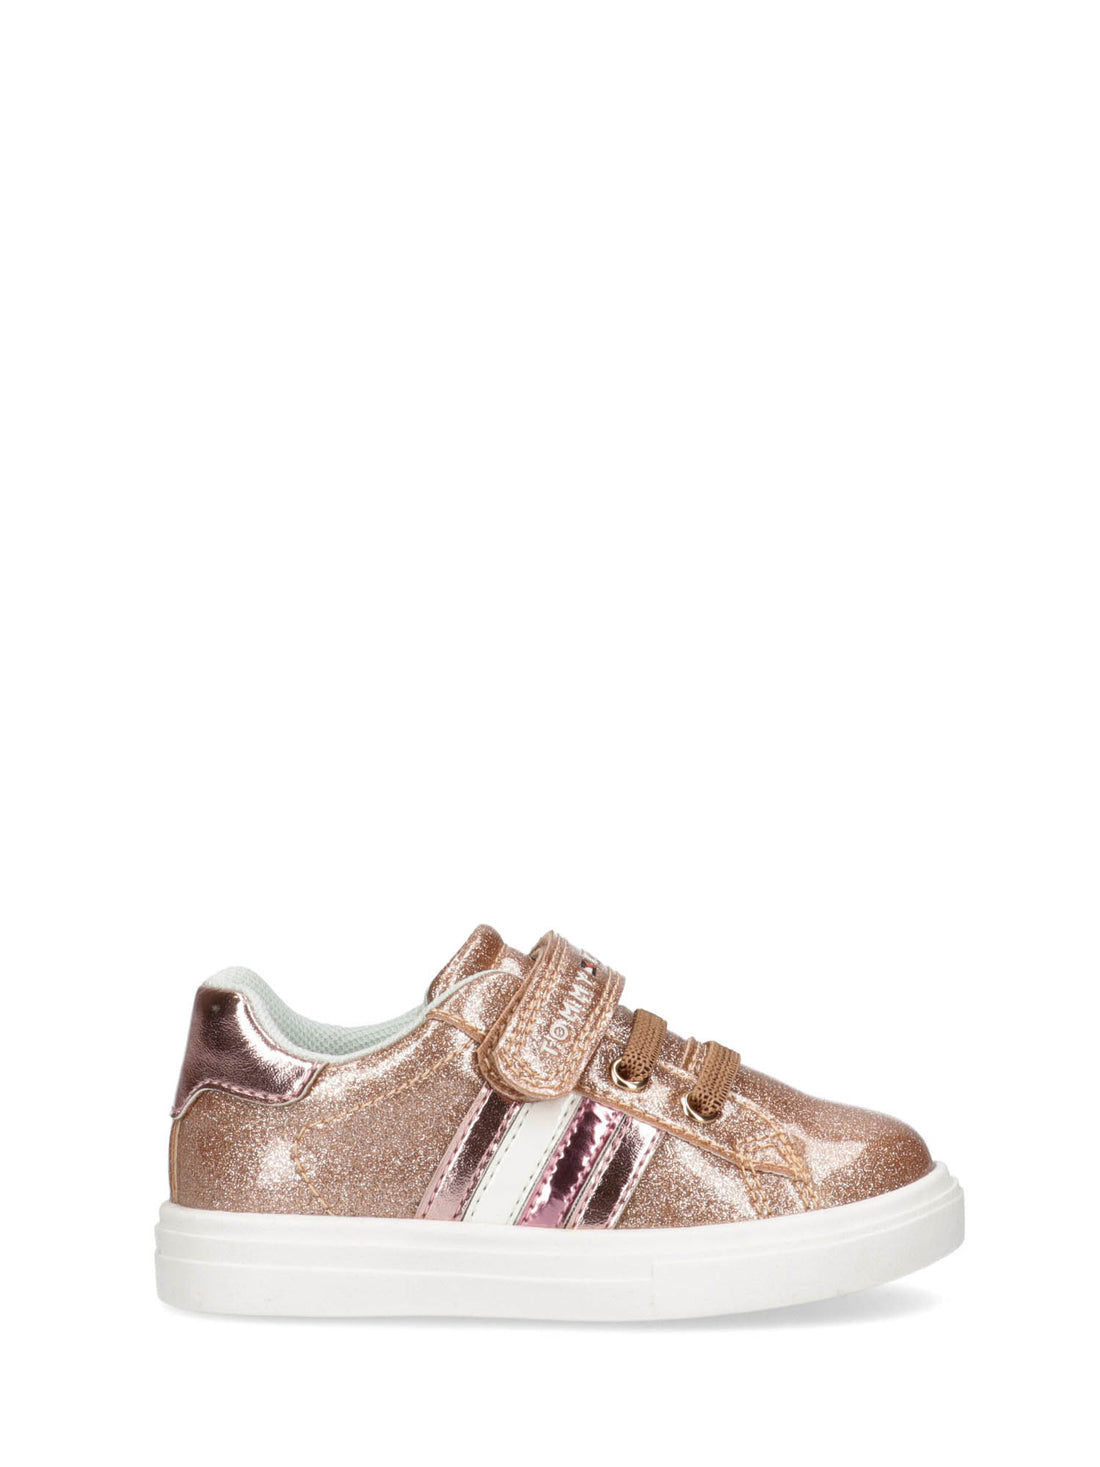 Sneakers Dorato Tommy Hilfiger